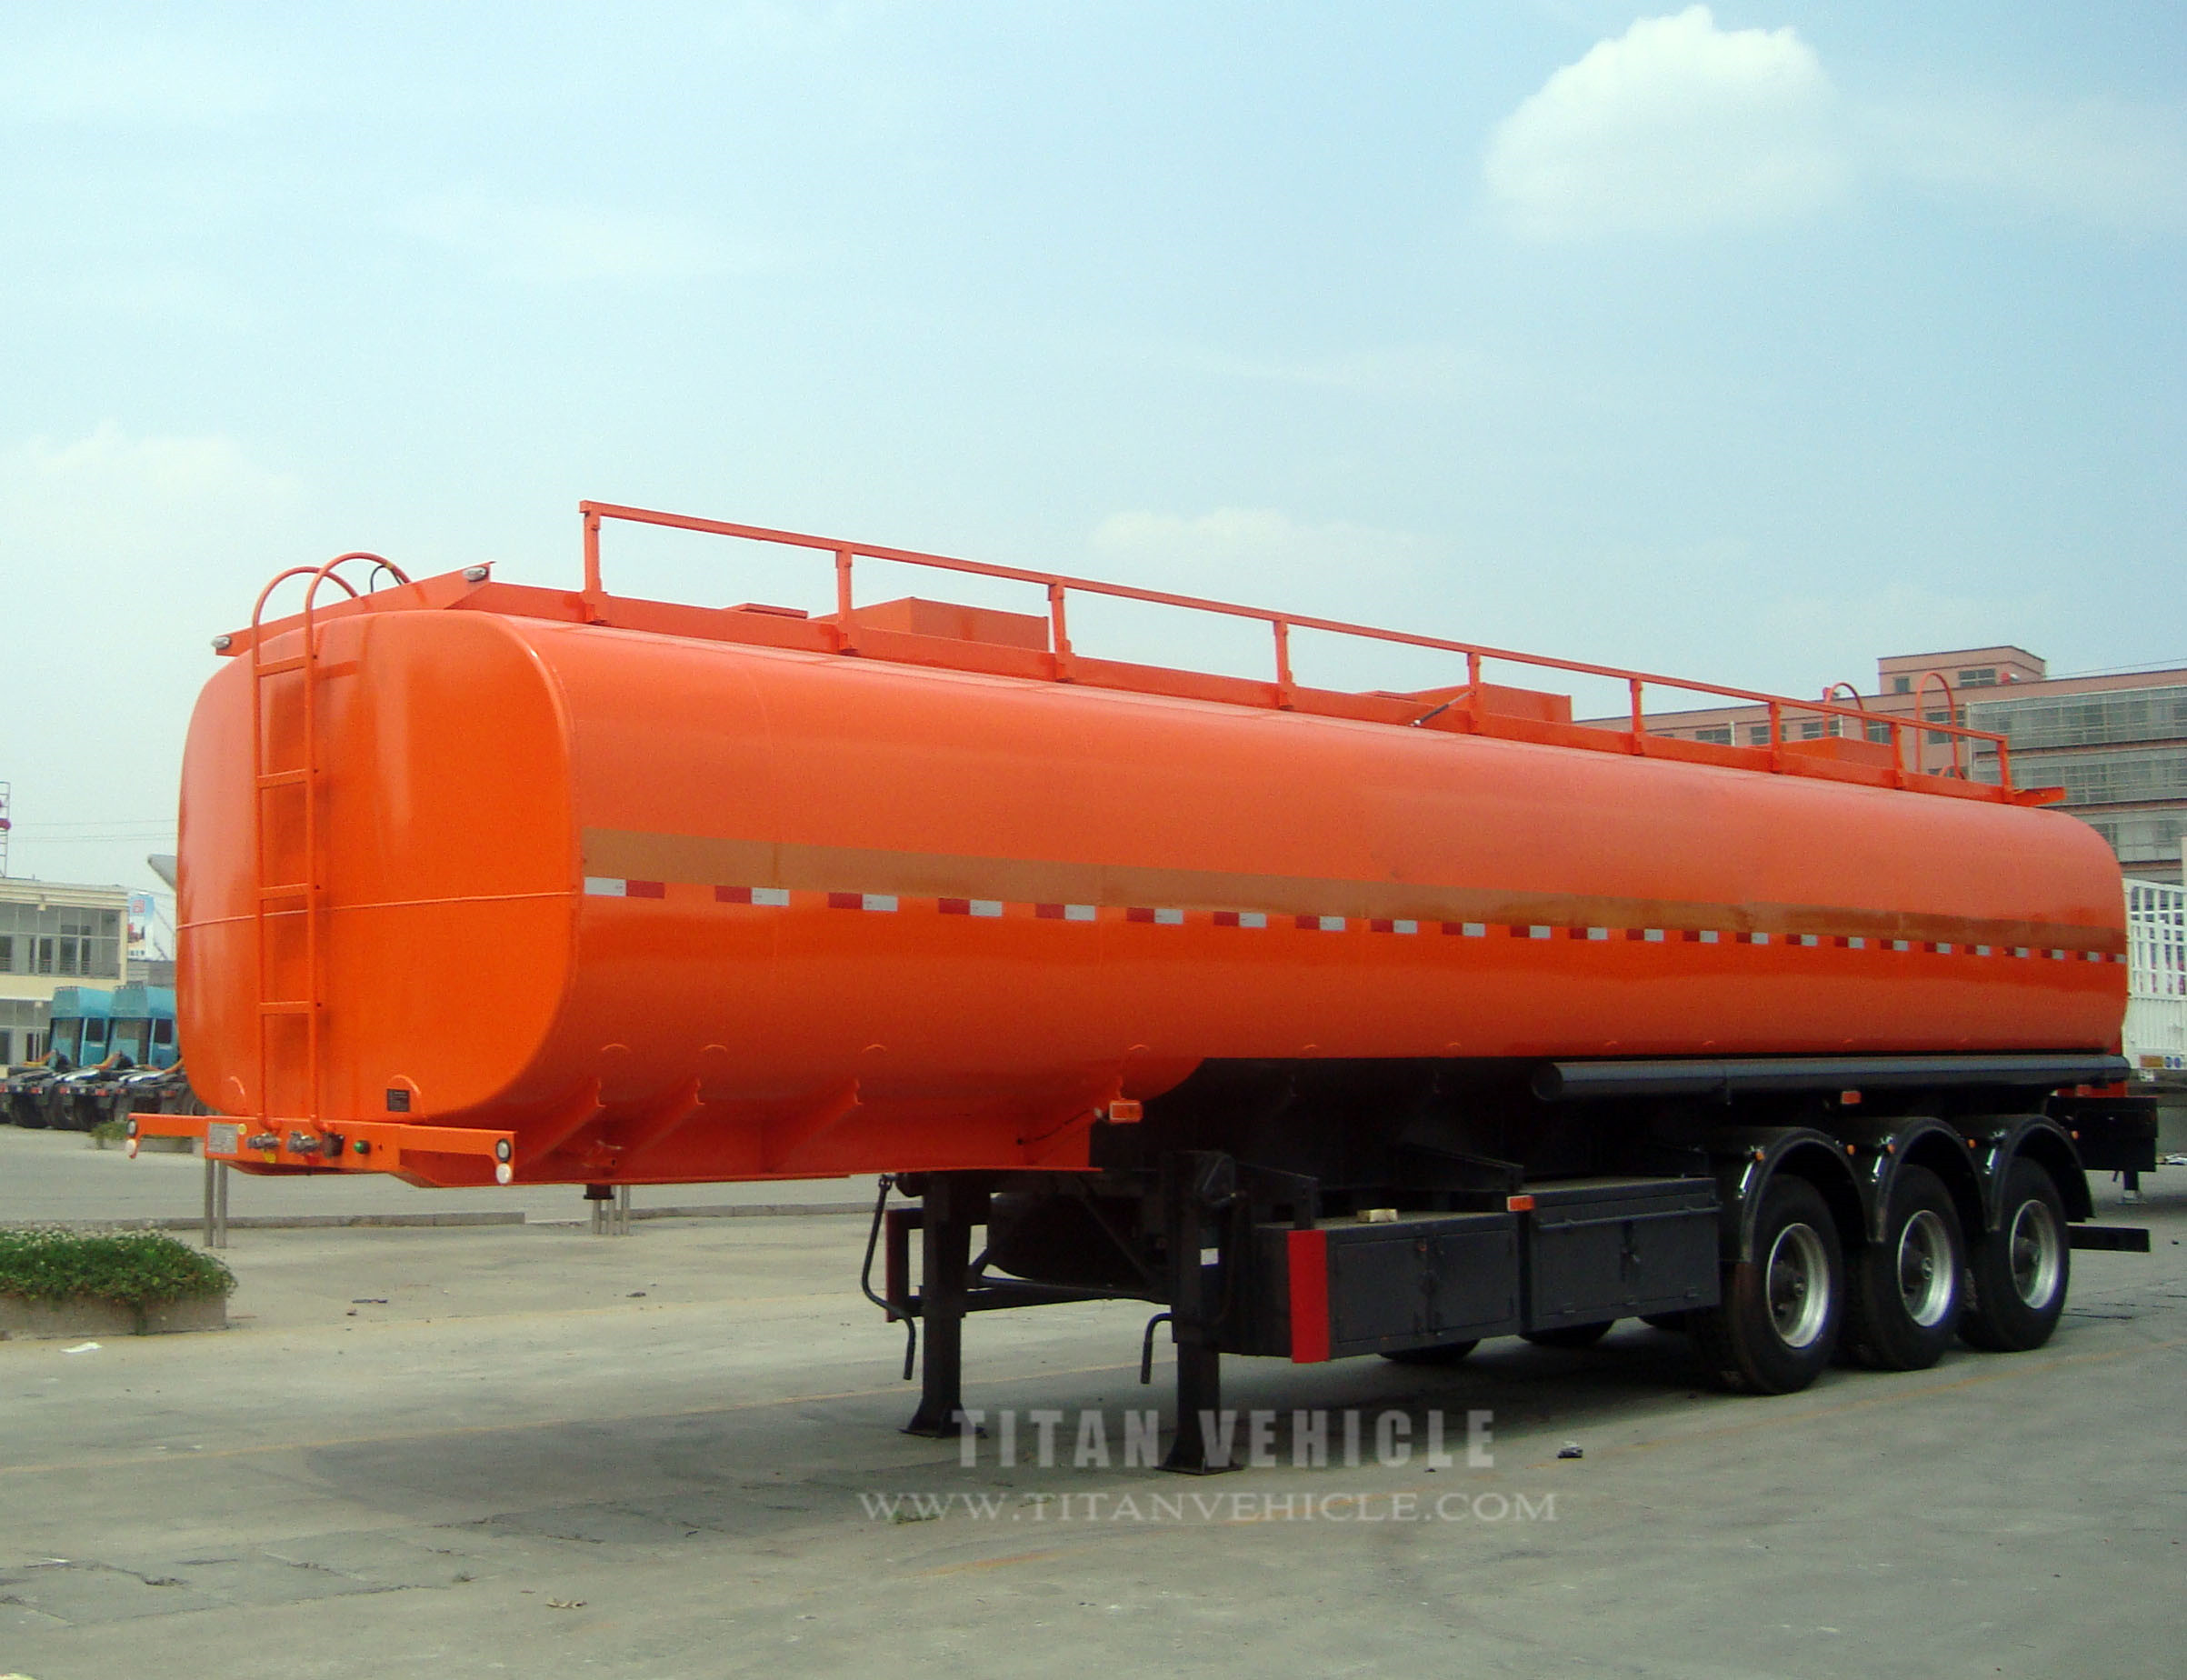 Titan produced the fuel tank trailers service trailers can be divided into separate compartments, each containing different types of oil.